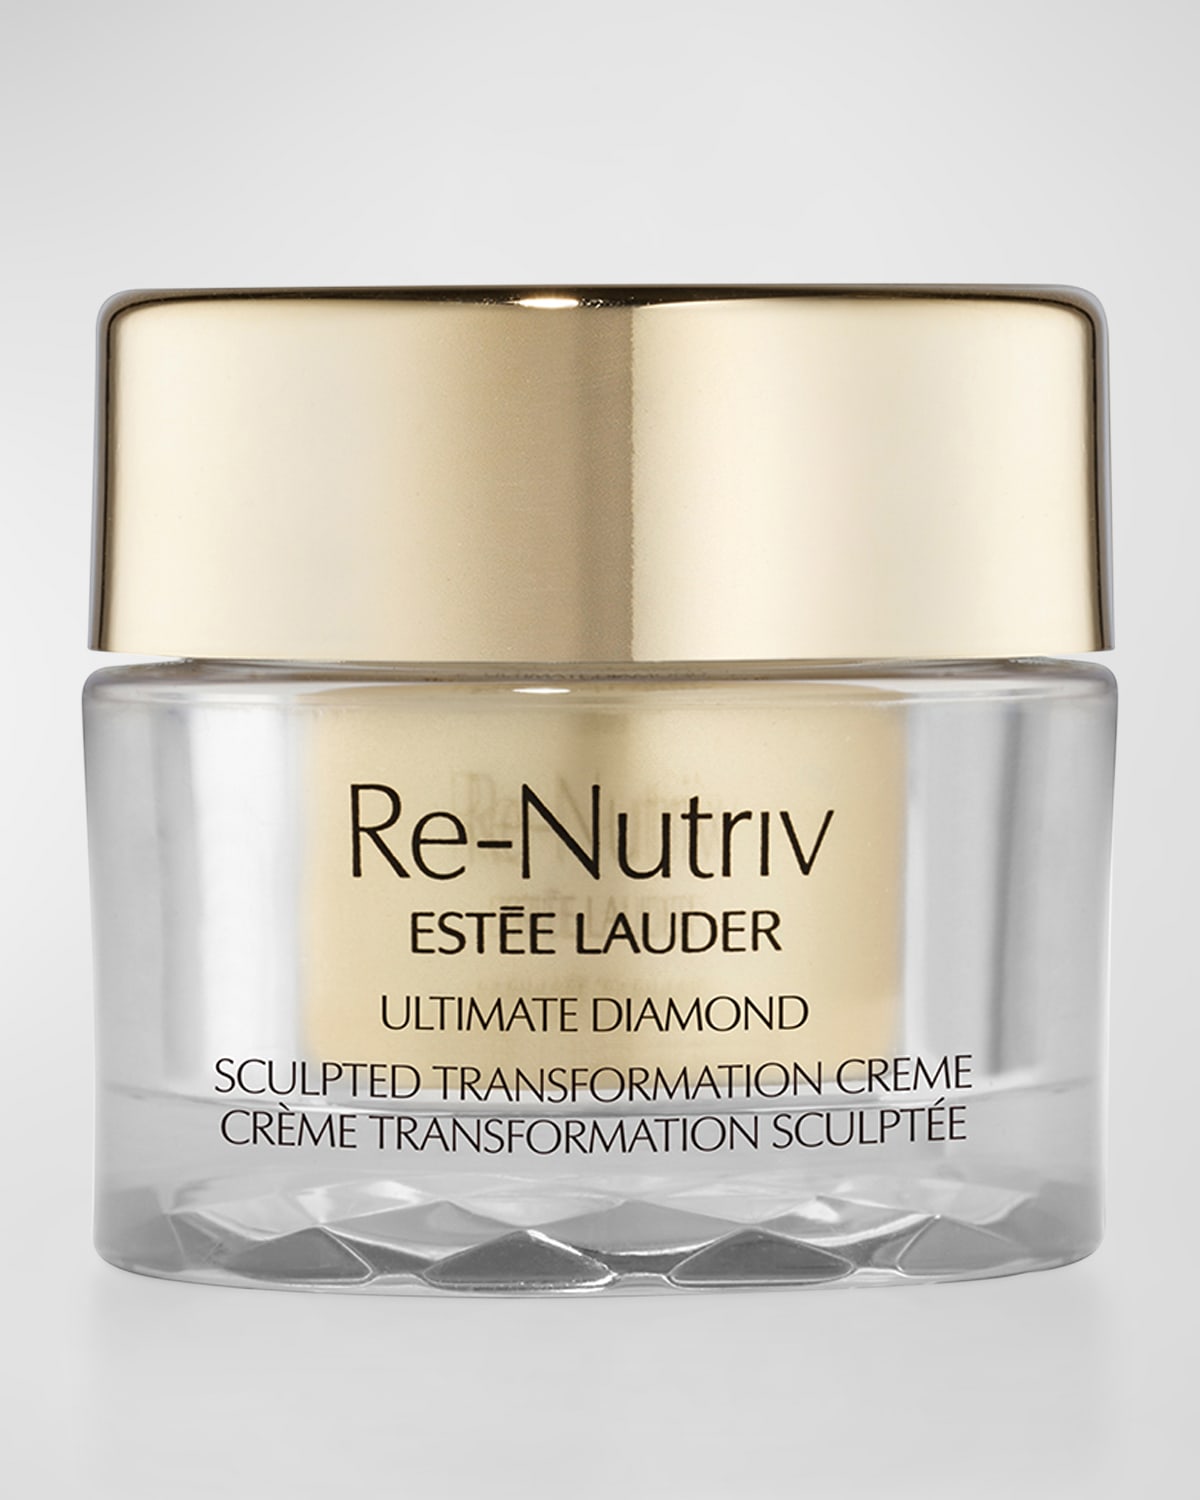 Ultimate Diamond Sculpted Transformation Creme, Yours with any $75 Estee Lauder Purchase